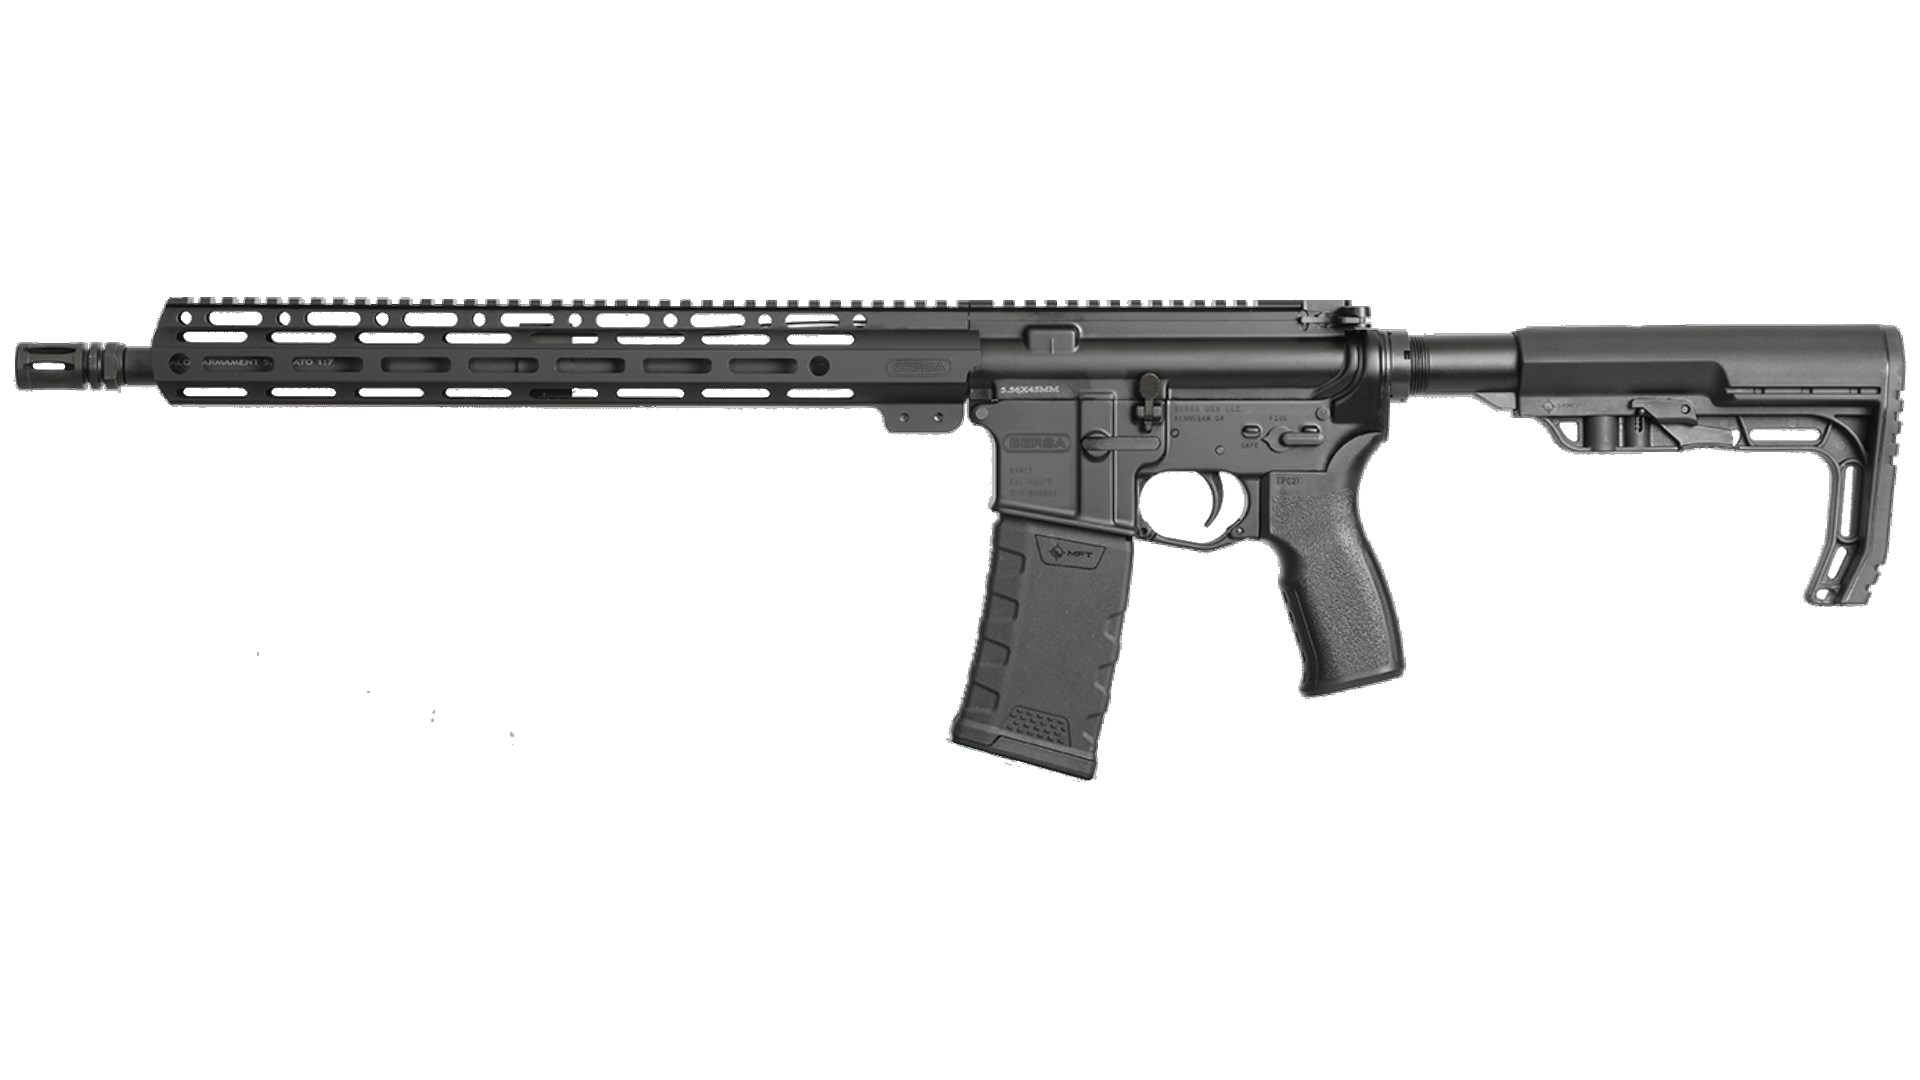 Left side of the Bersa BAR15 rifle with Mission First Tactical furniture.